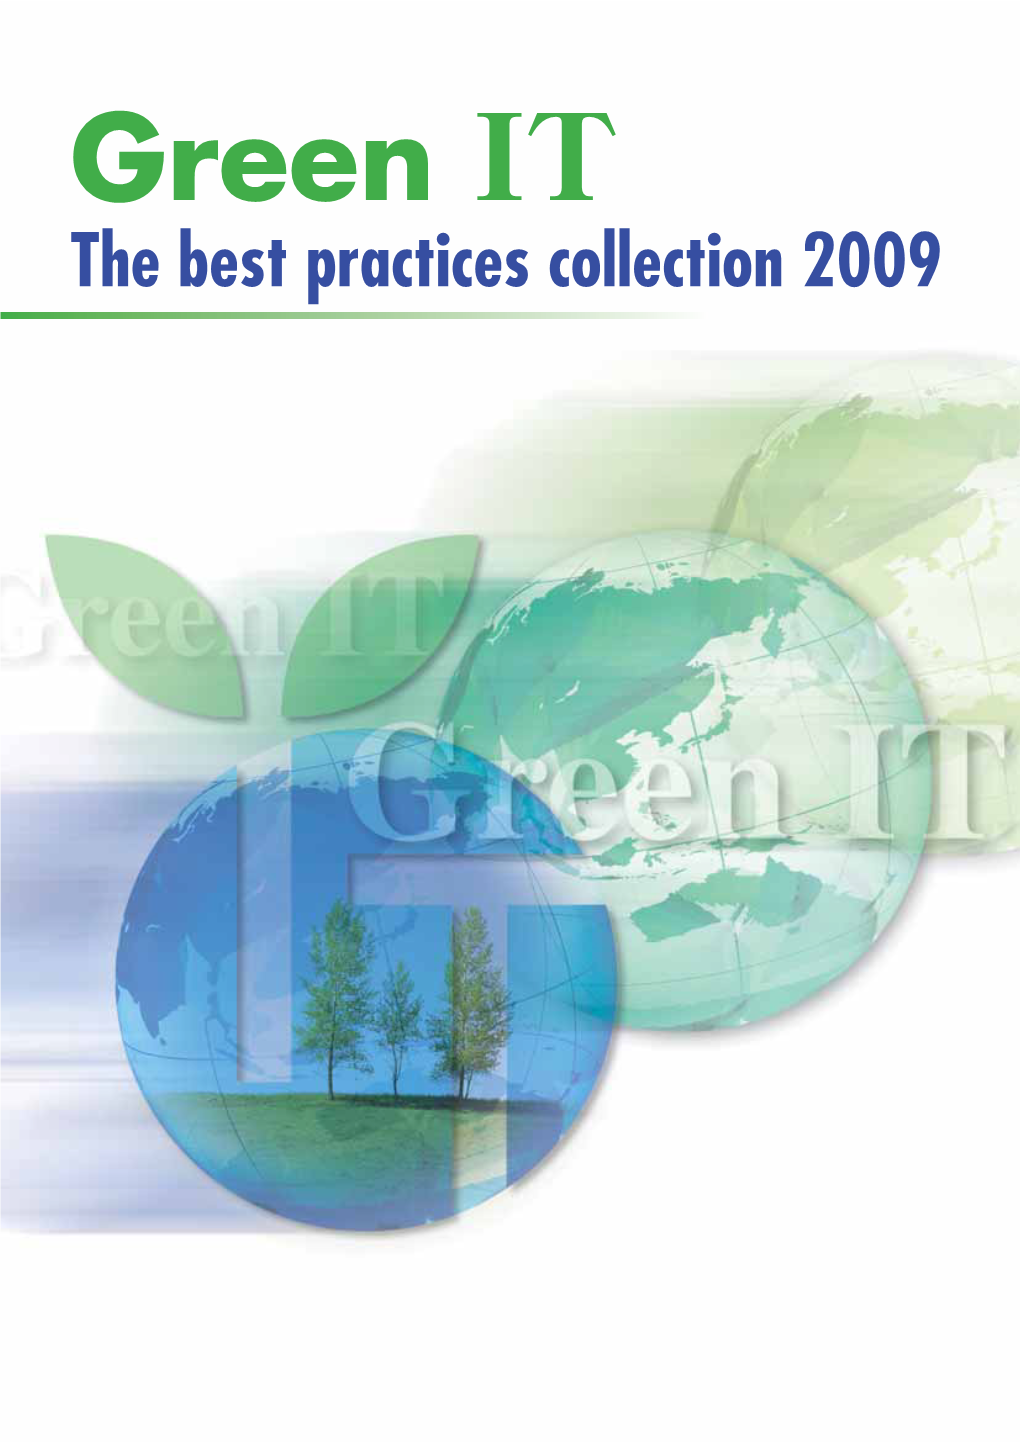 Green IT the Best Practices Collection 2009 CONTENTS